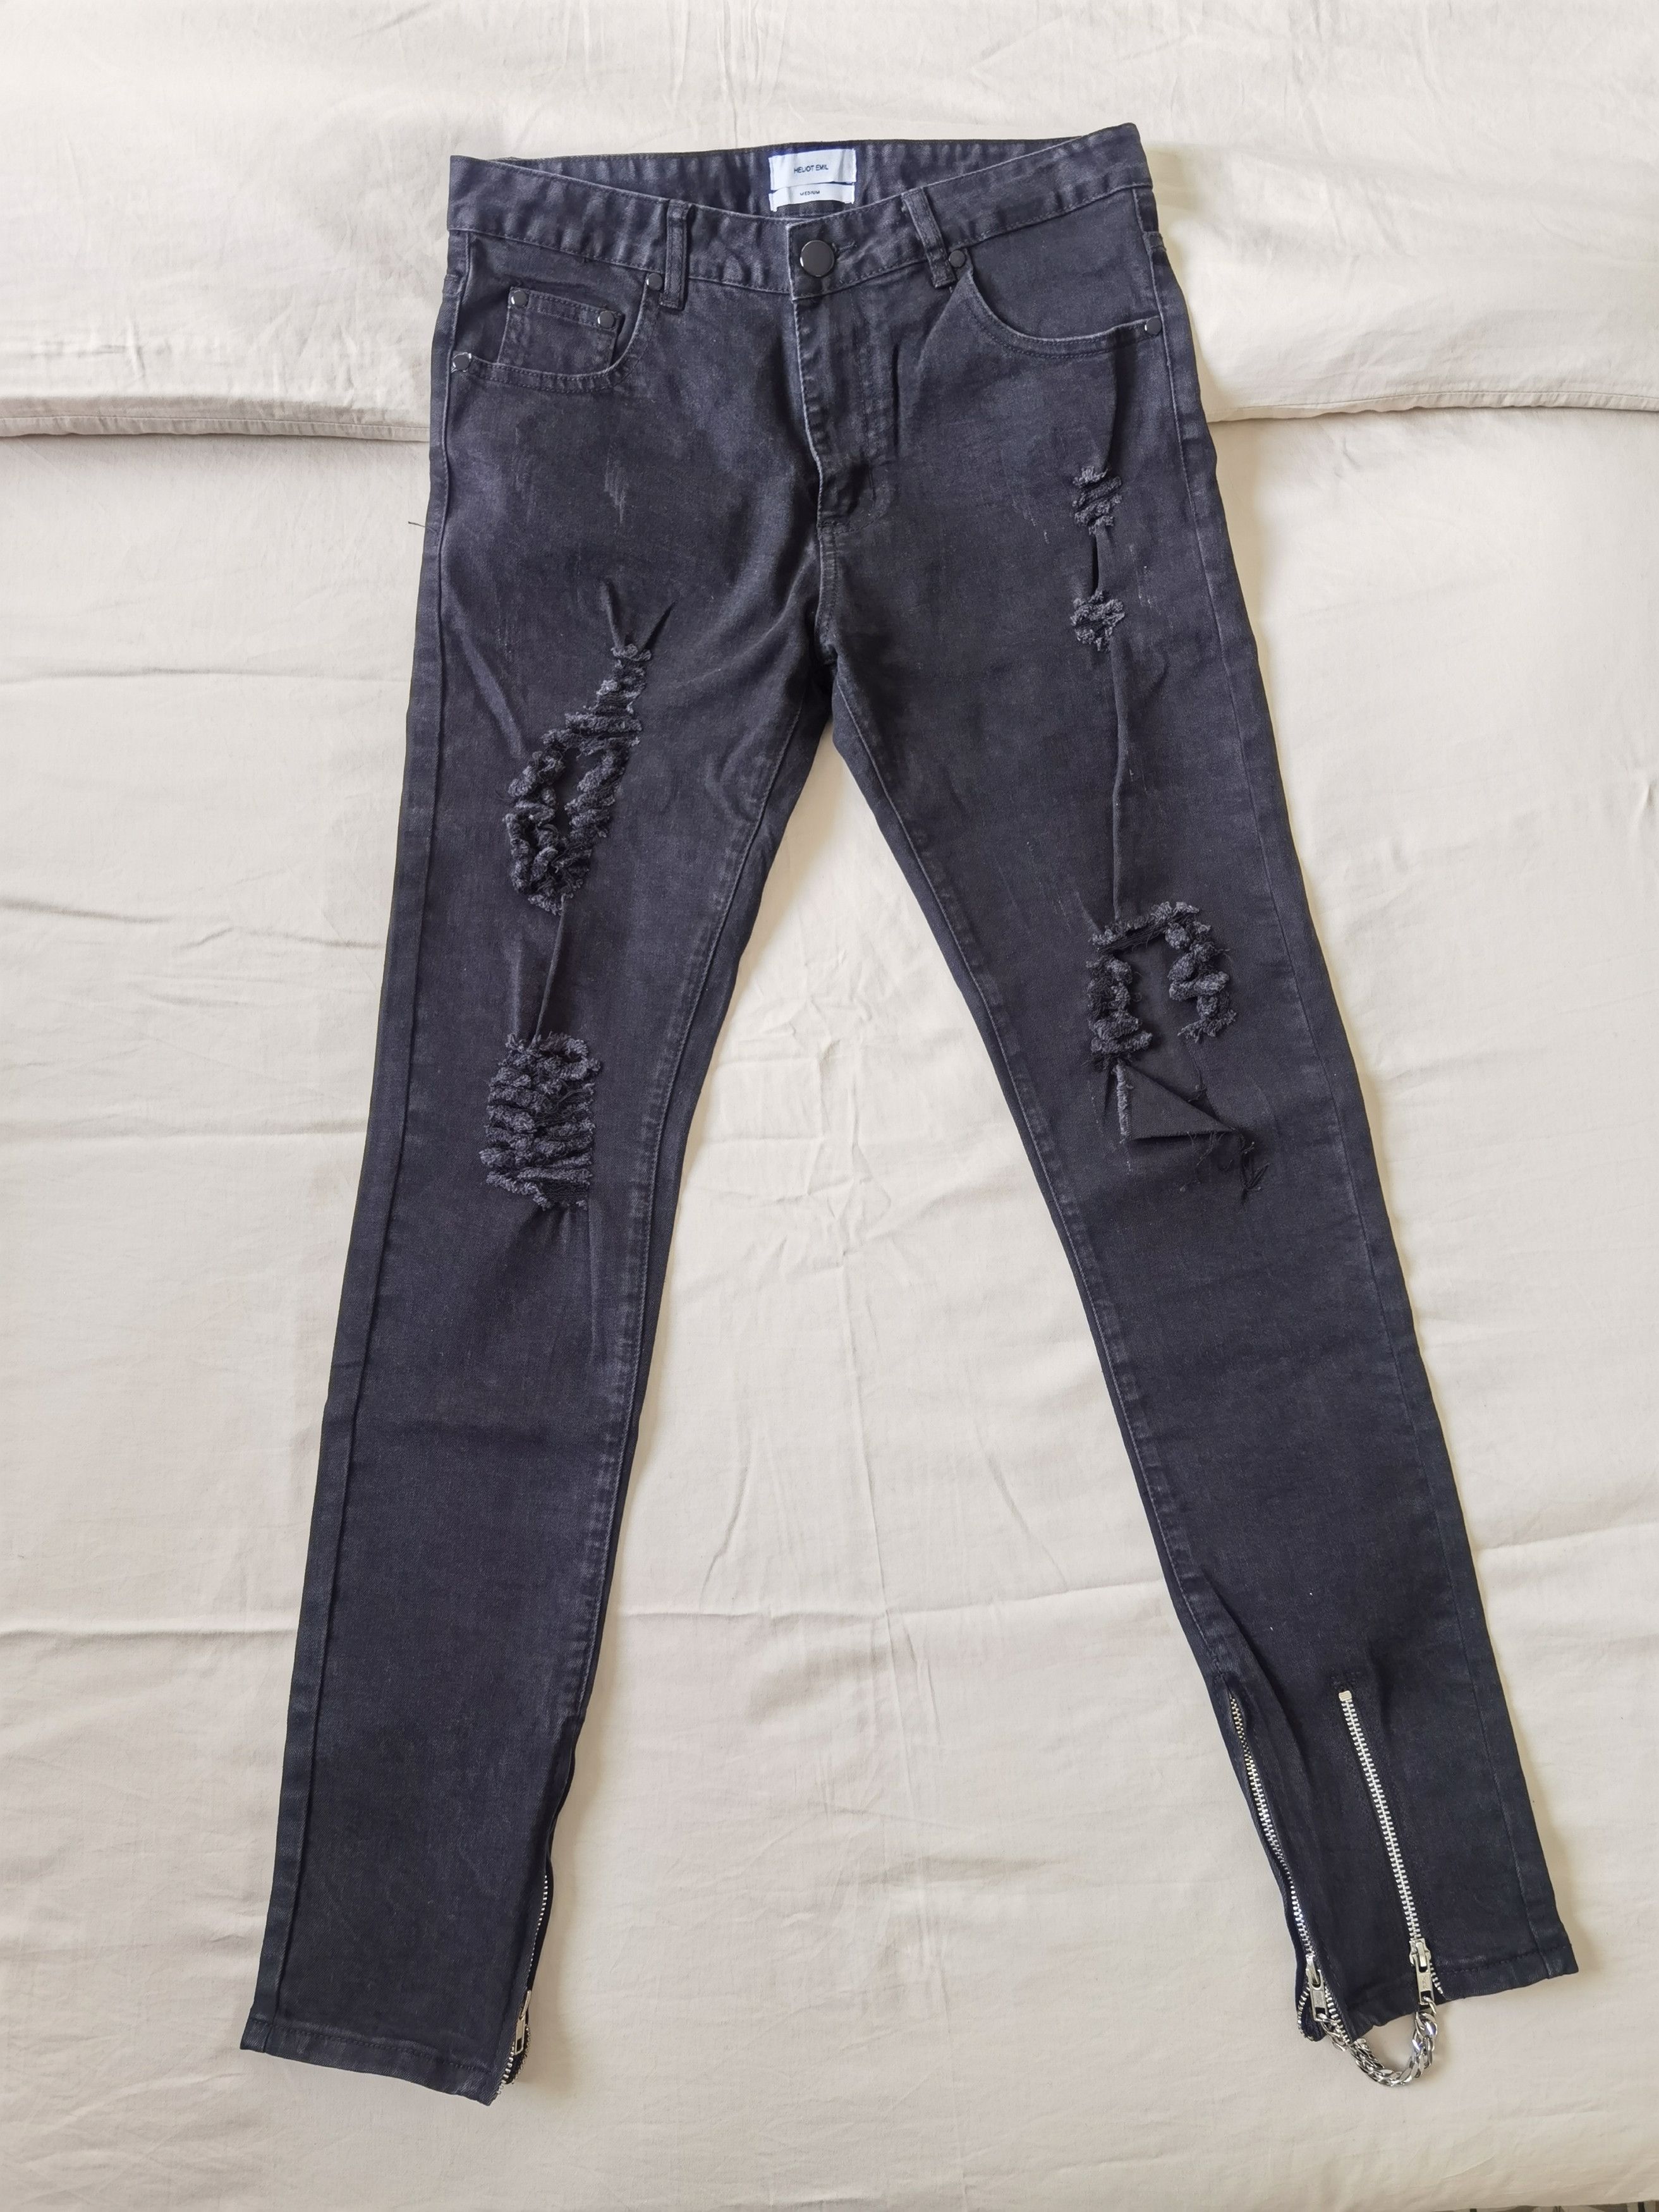 Heliot Emil Ripped Denim Pants with side Zippers - 14